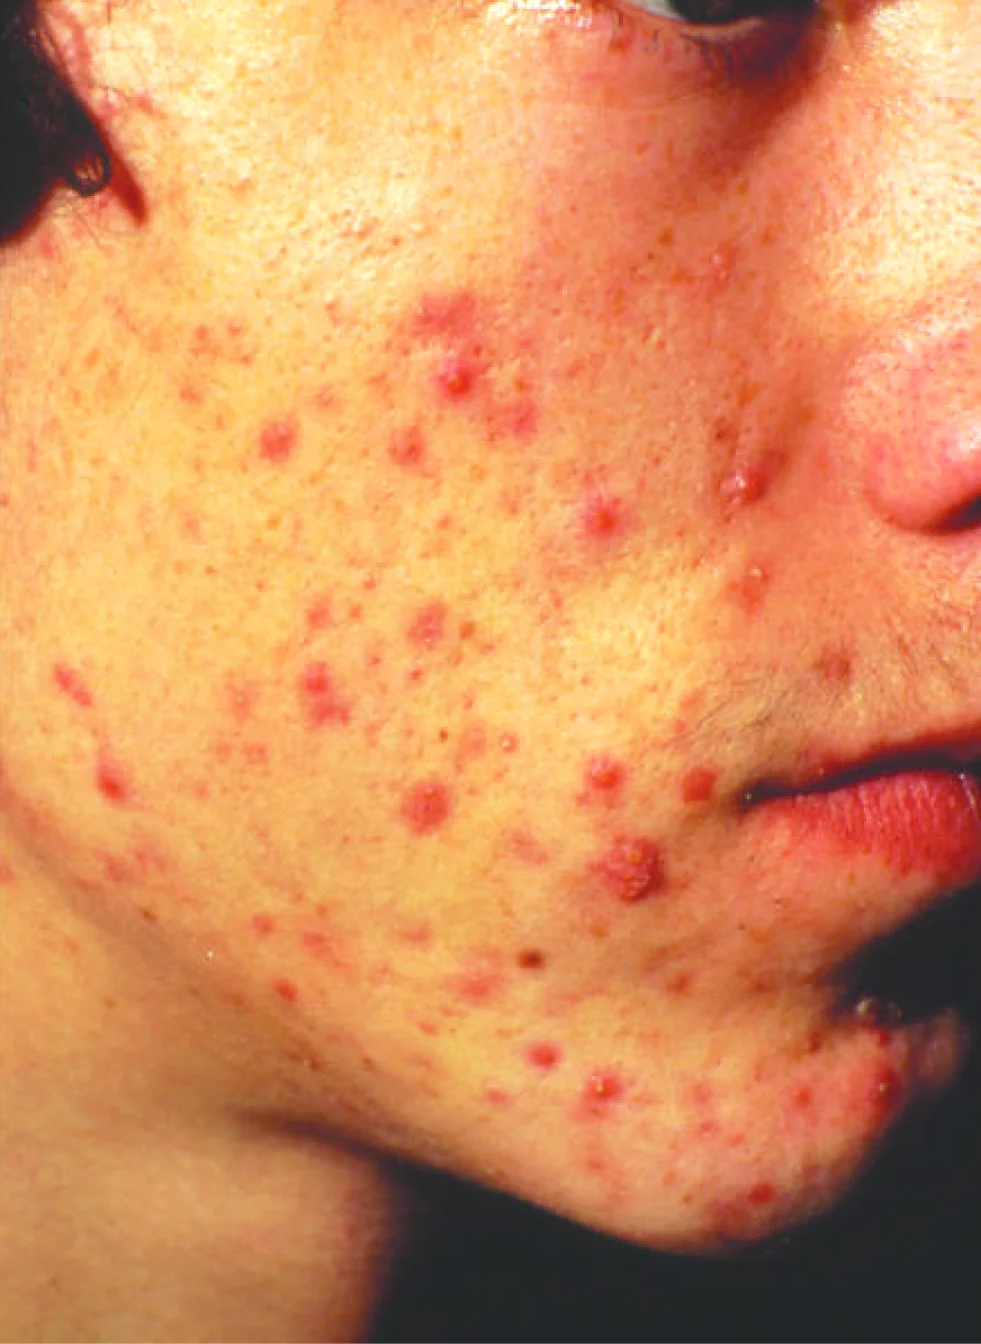 Severe acne must be consulted with a physician